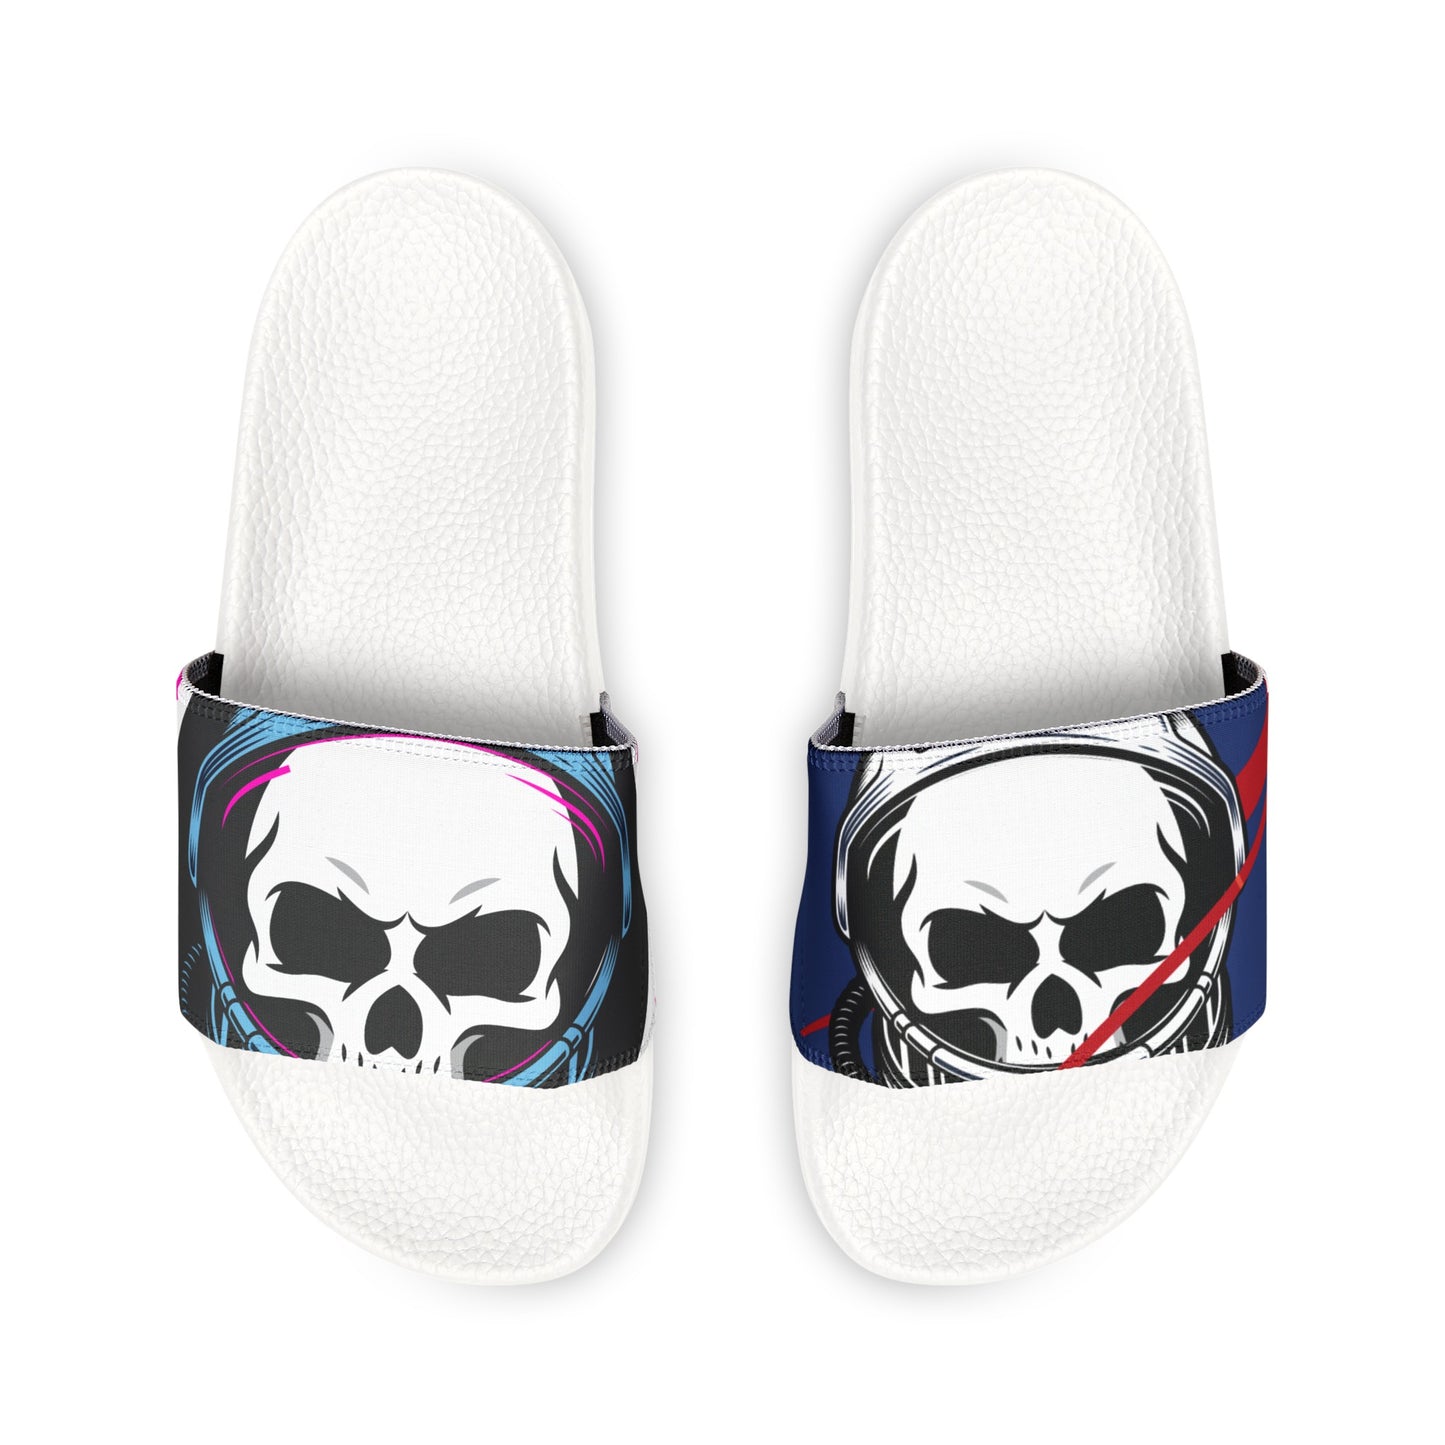 Space Cases Men's Slippers